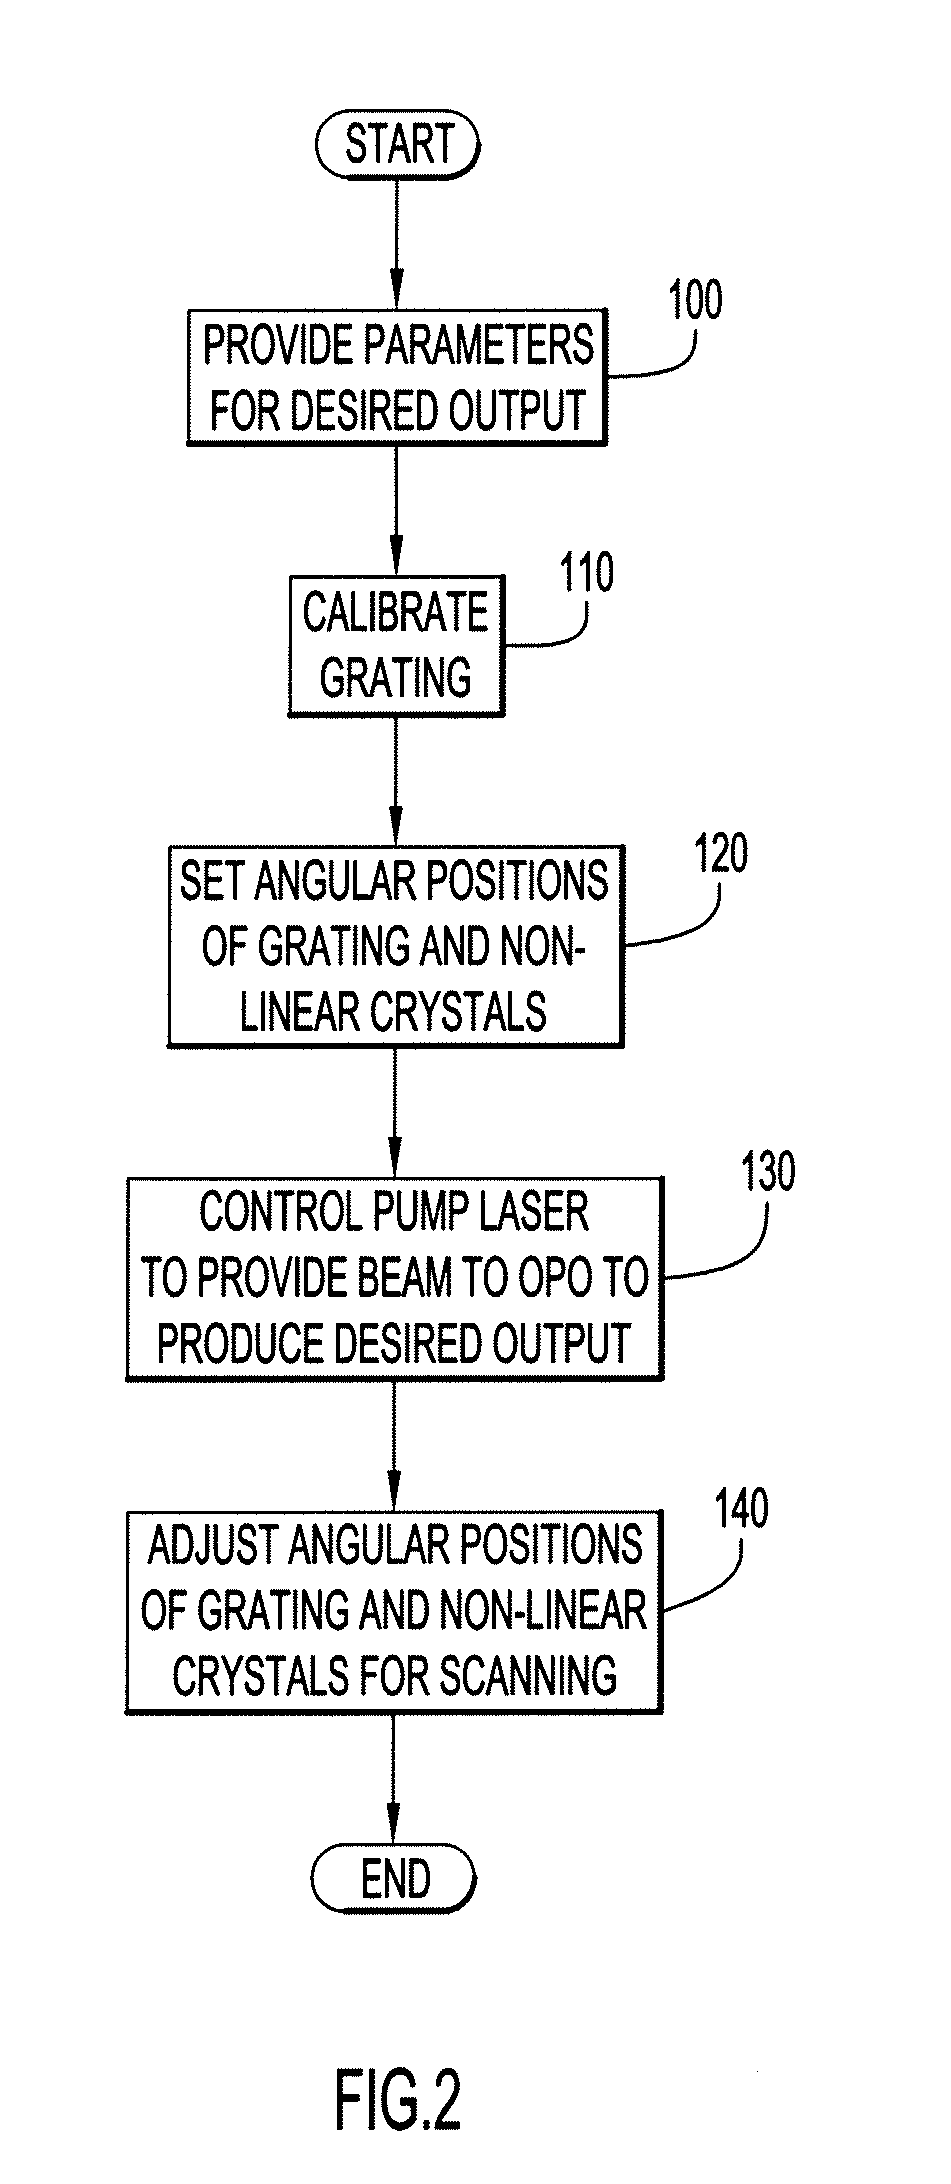 Grating Based Optical Parametric Oscillator and Method of Dynamically Tuning the Oscillator for Generating Desired Optical Signals